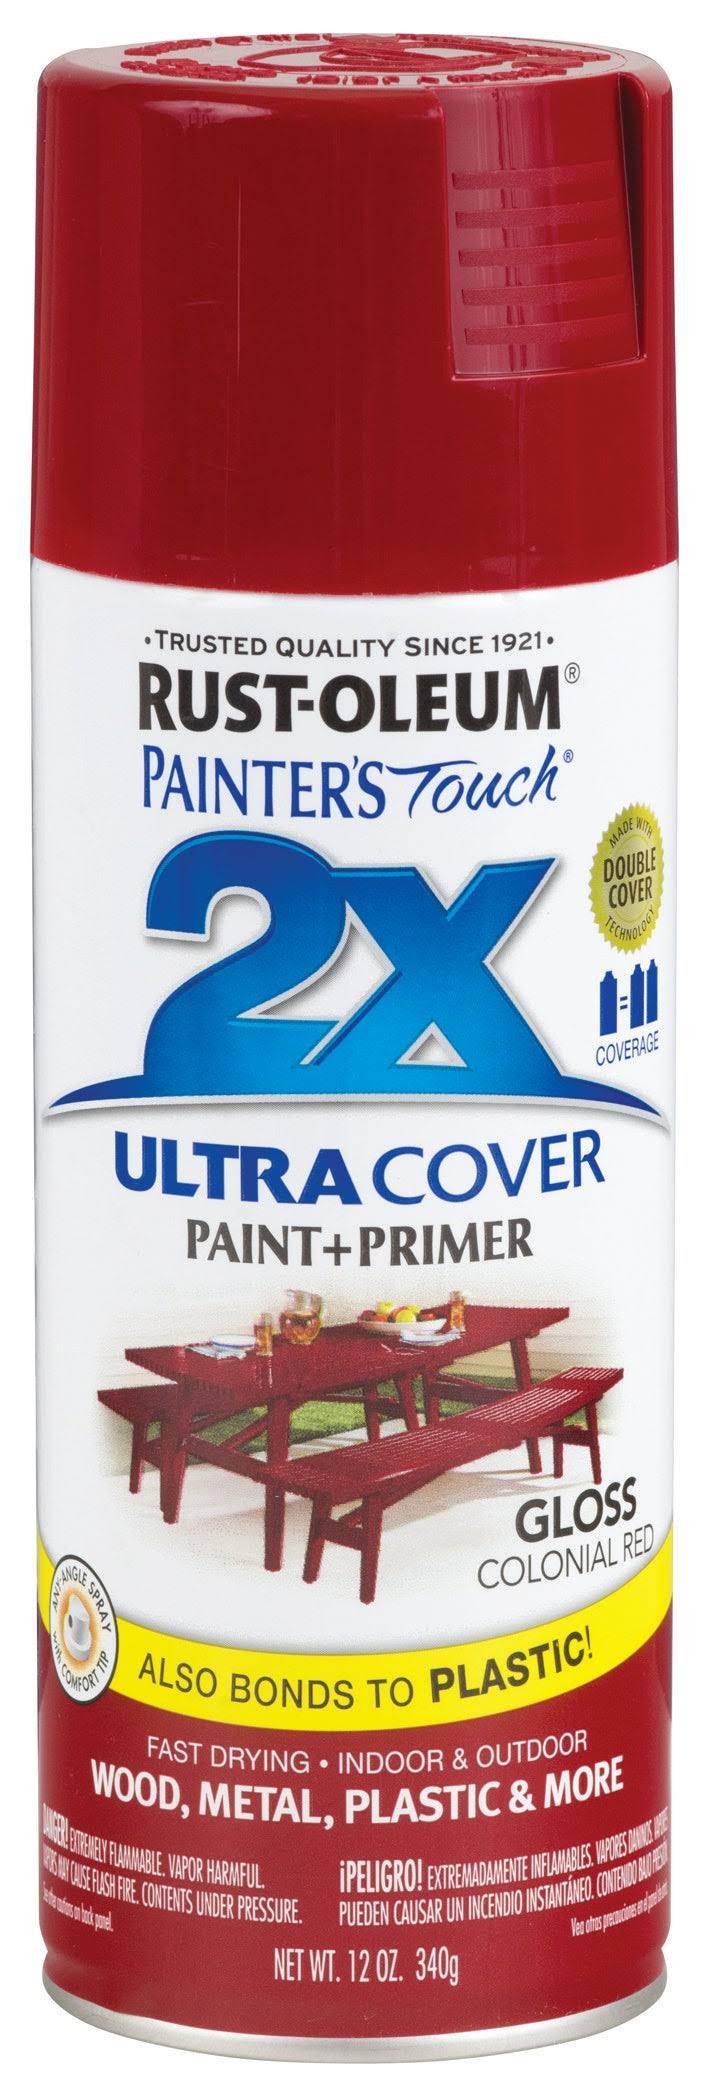 Rust-Oleum Painter's Touch 2X General Purpose Spray Paint - Gloss Colonial Red, 12oz